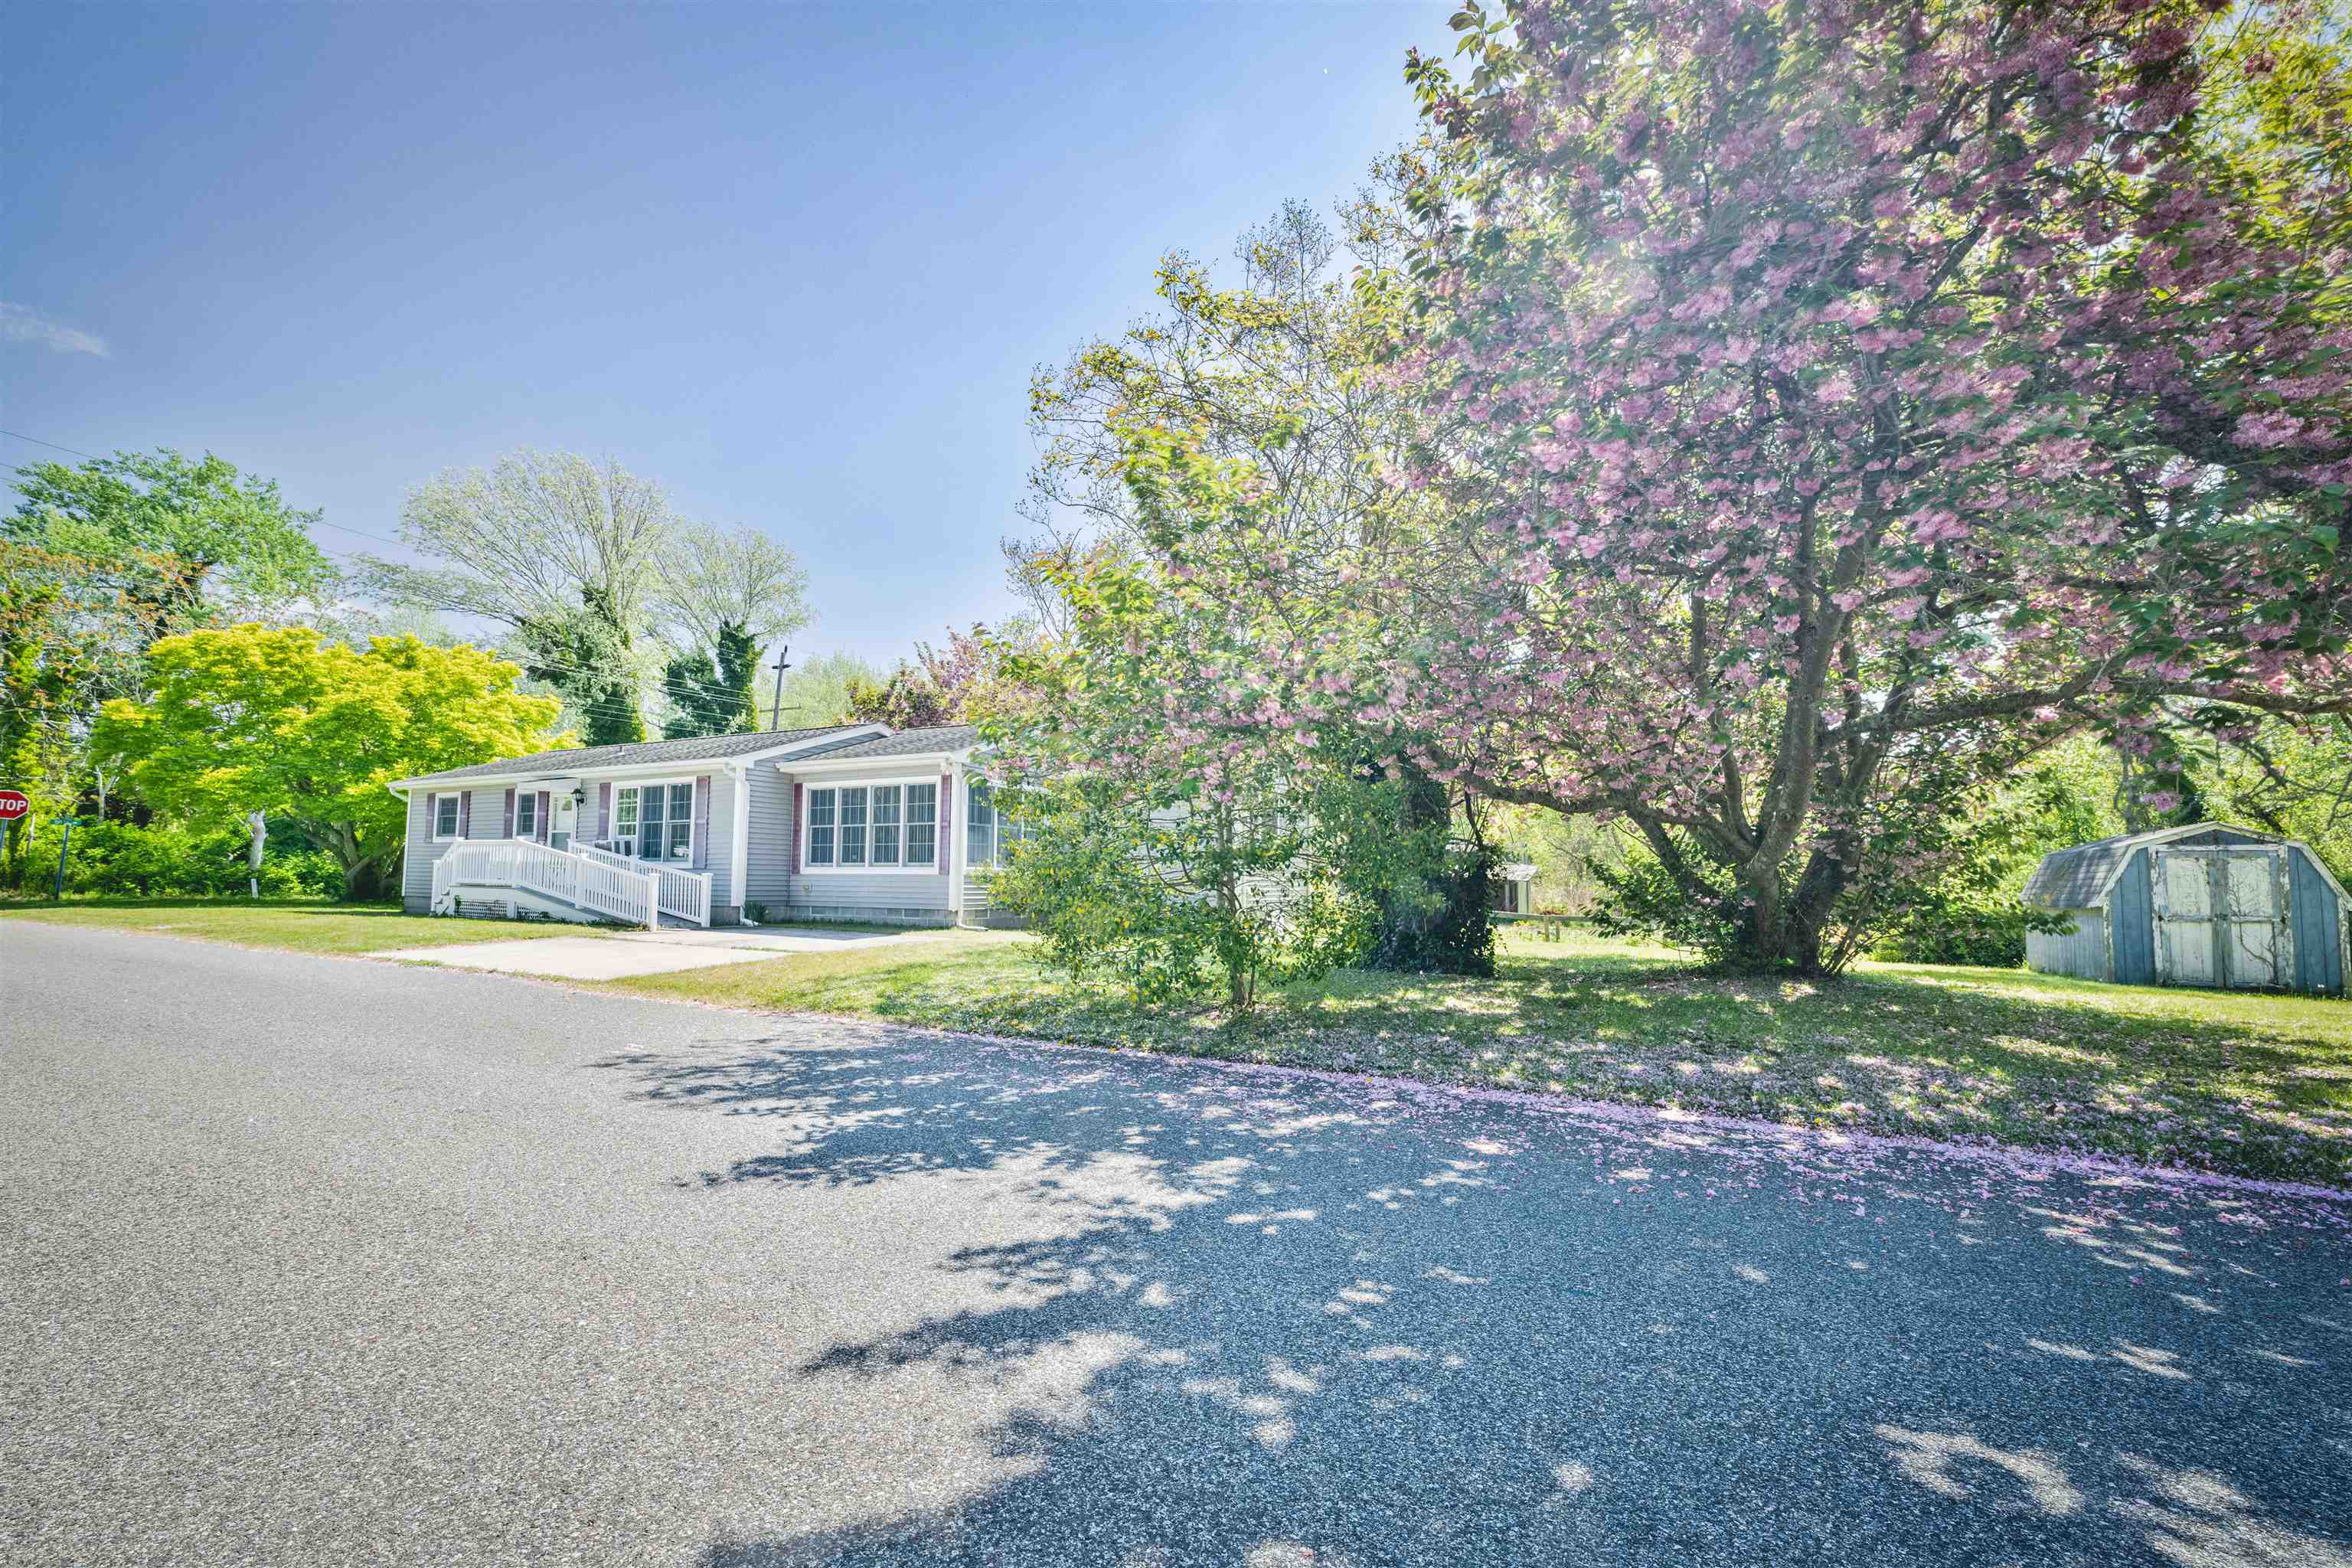 502 State, West Cape May, New Jersey, 08204, United States, 2 Bedrooms Bedrooms, ,2 BathroomsBathrooms,Residential,For Sale,502 State,1478894